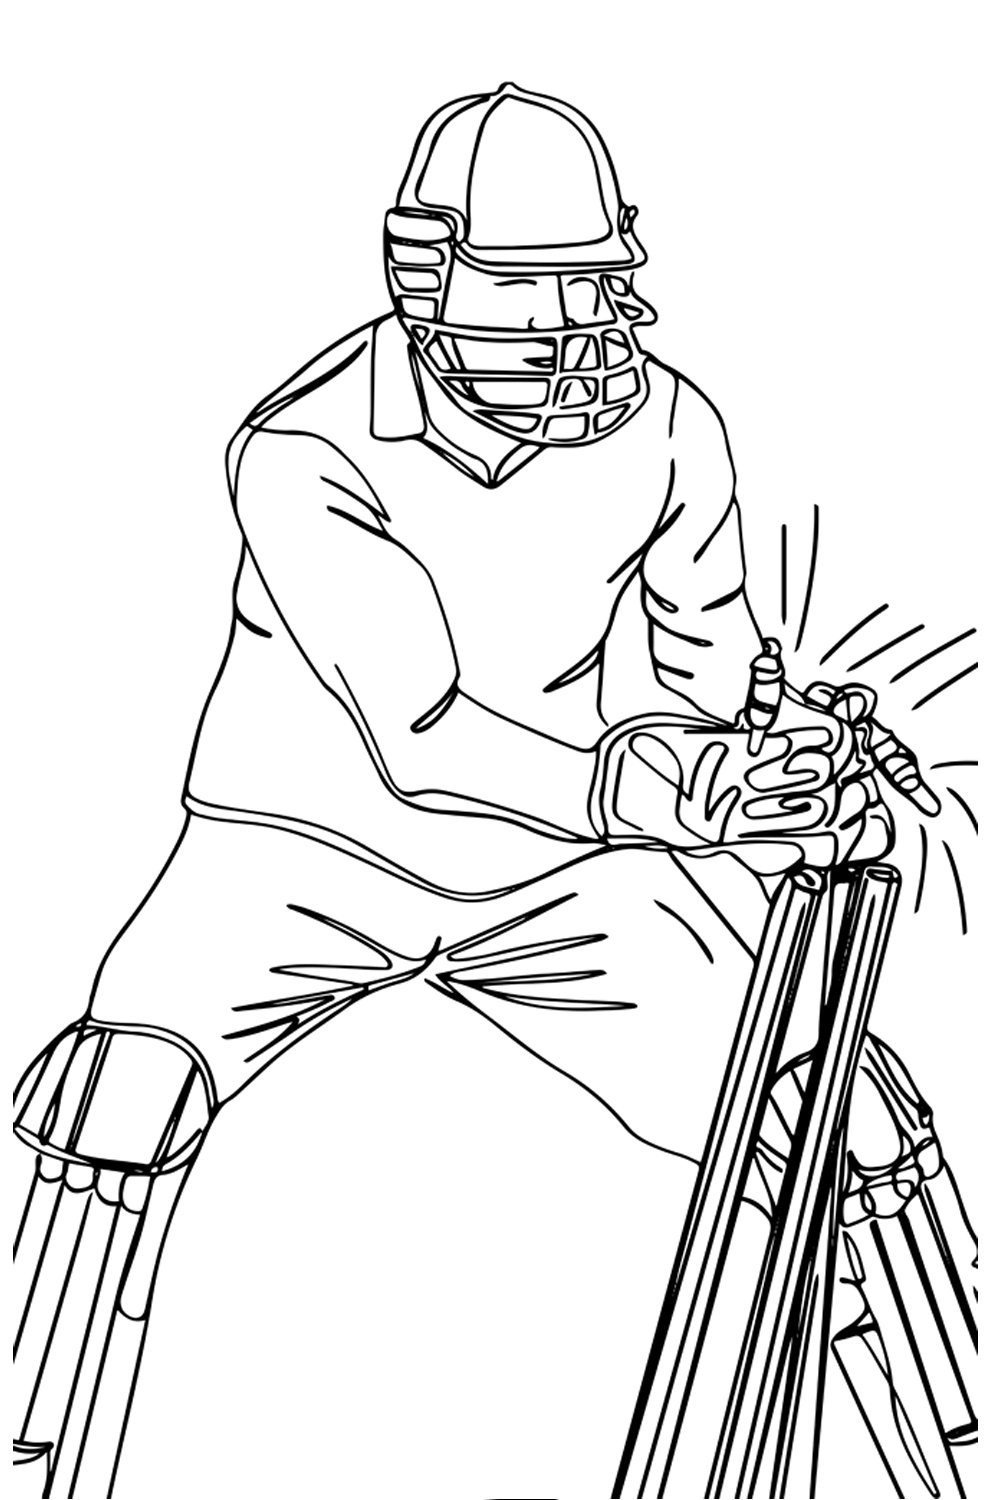 Dynamic Stumping Motion: One-Line Sketch of Cricket Wicket Keeper, Fast and Furious: Continuous Line Drawing of Wicket Keeper's Quick Stumping pinterest preview image.